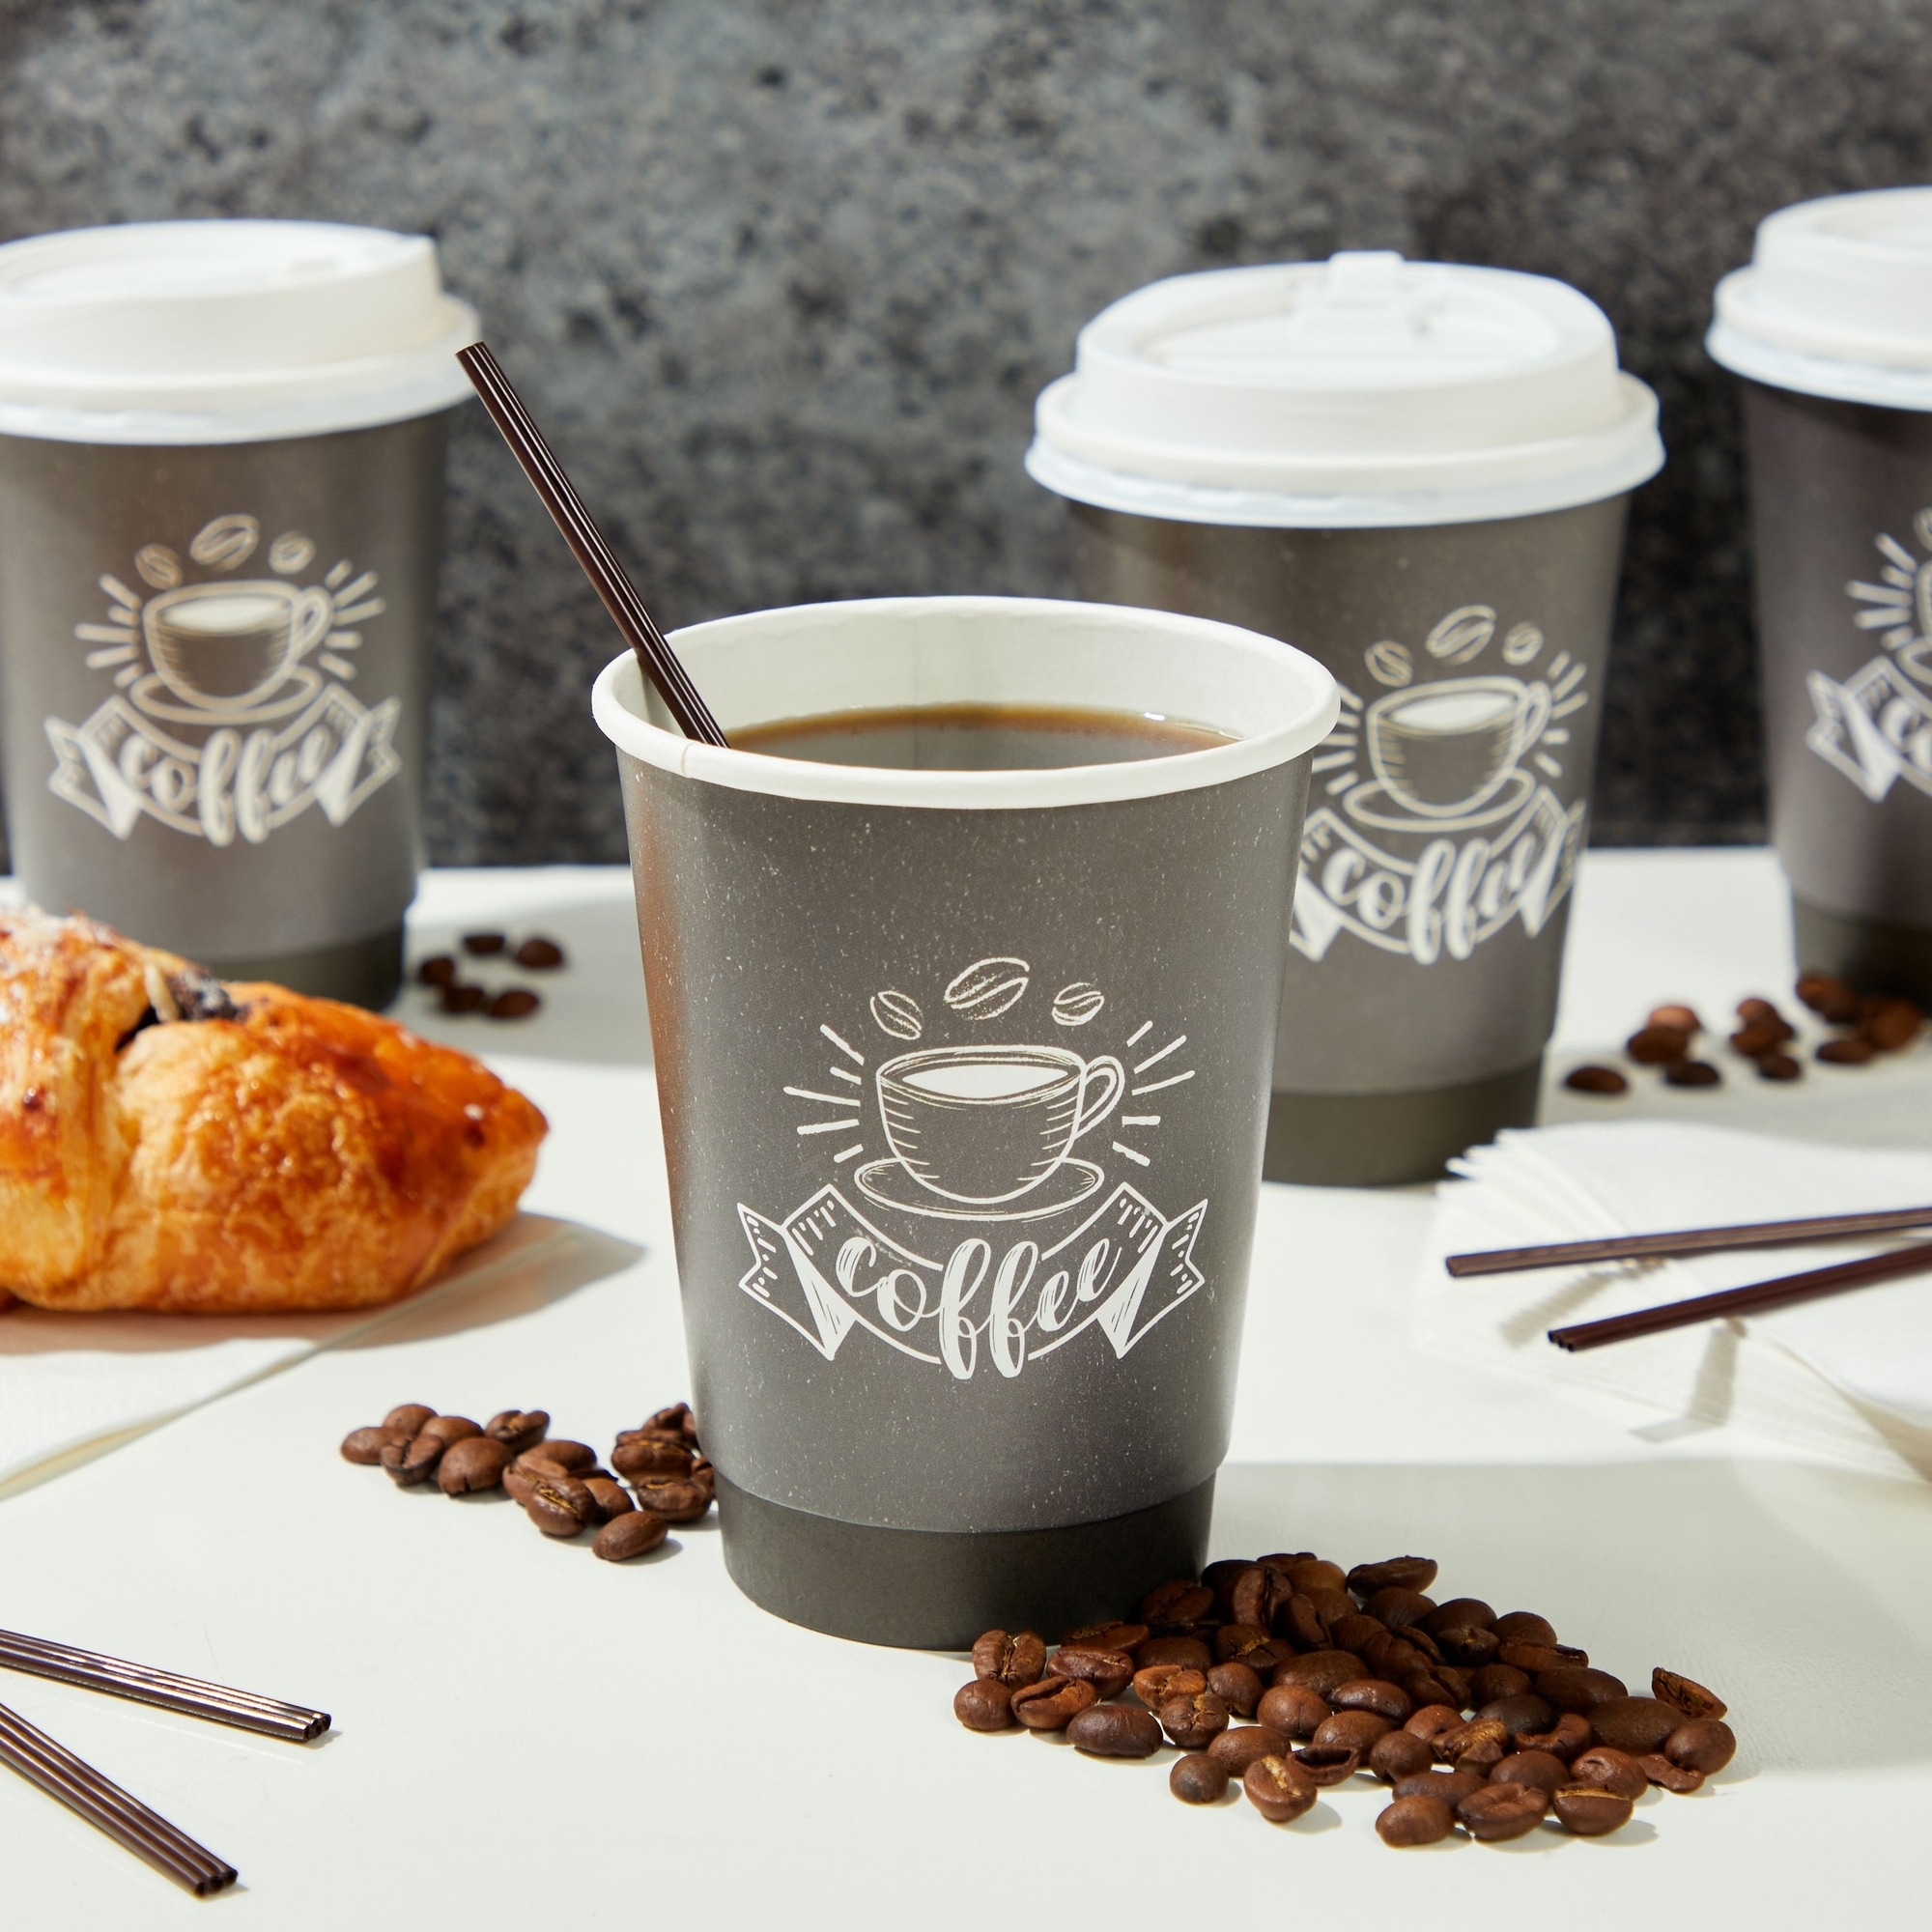 https://ak1.ostkcdn.com/images/products/is/images/direct/ba193a5842531b89c2ed69dedb756b2b023fbf6a/50-Pack-12-oz-Disposable-Paper-Coffee-Cups-with-Lids%2C-Stir-Straws%2C-and-Napkins-for-Hot-Drinks-To-Go-%28Black%29.jpg